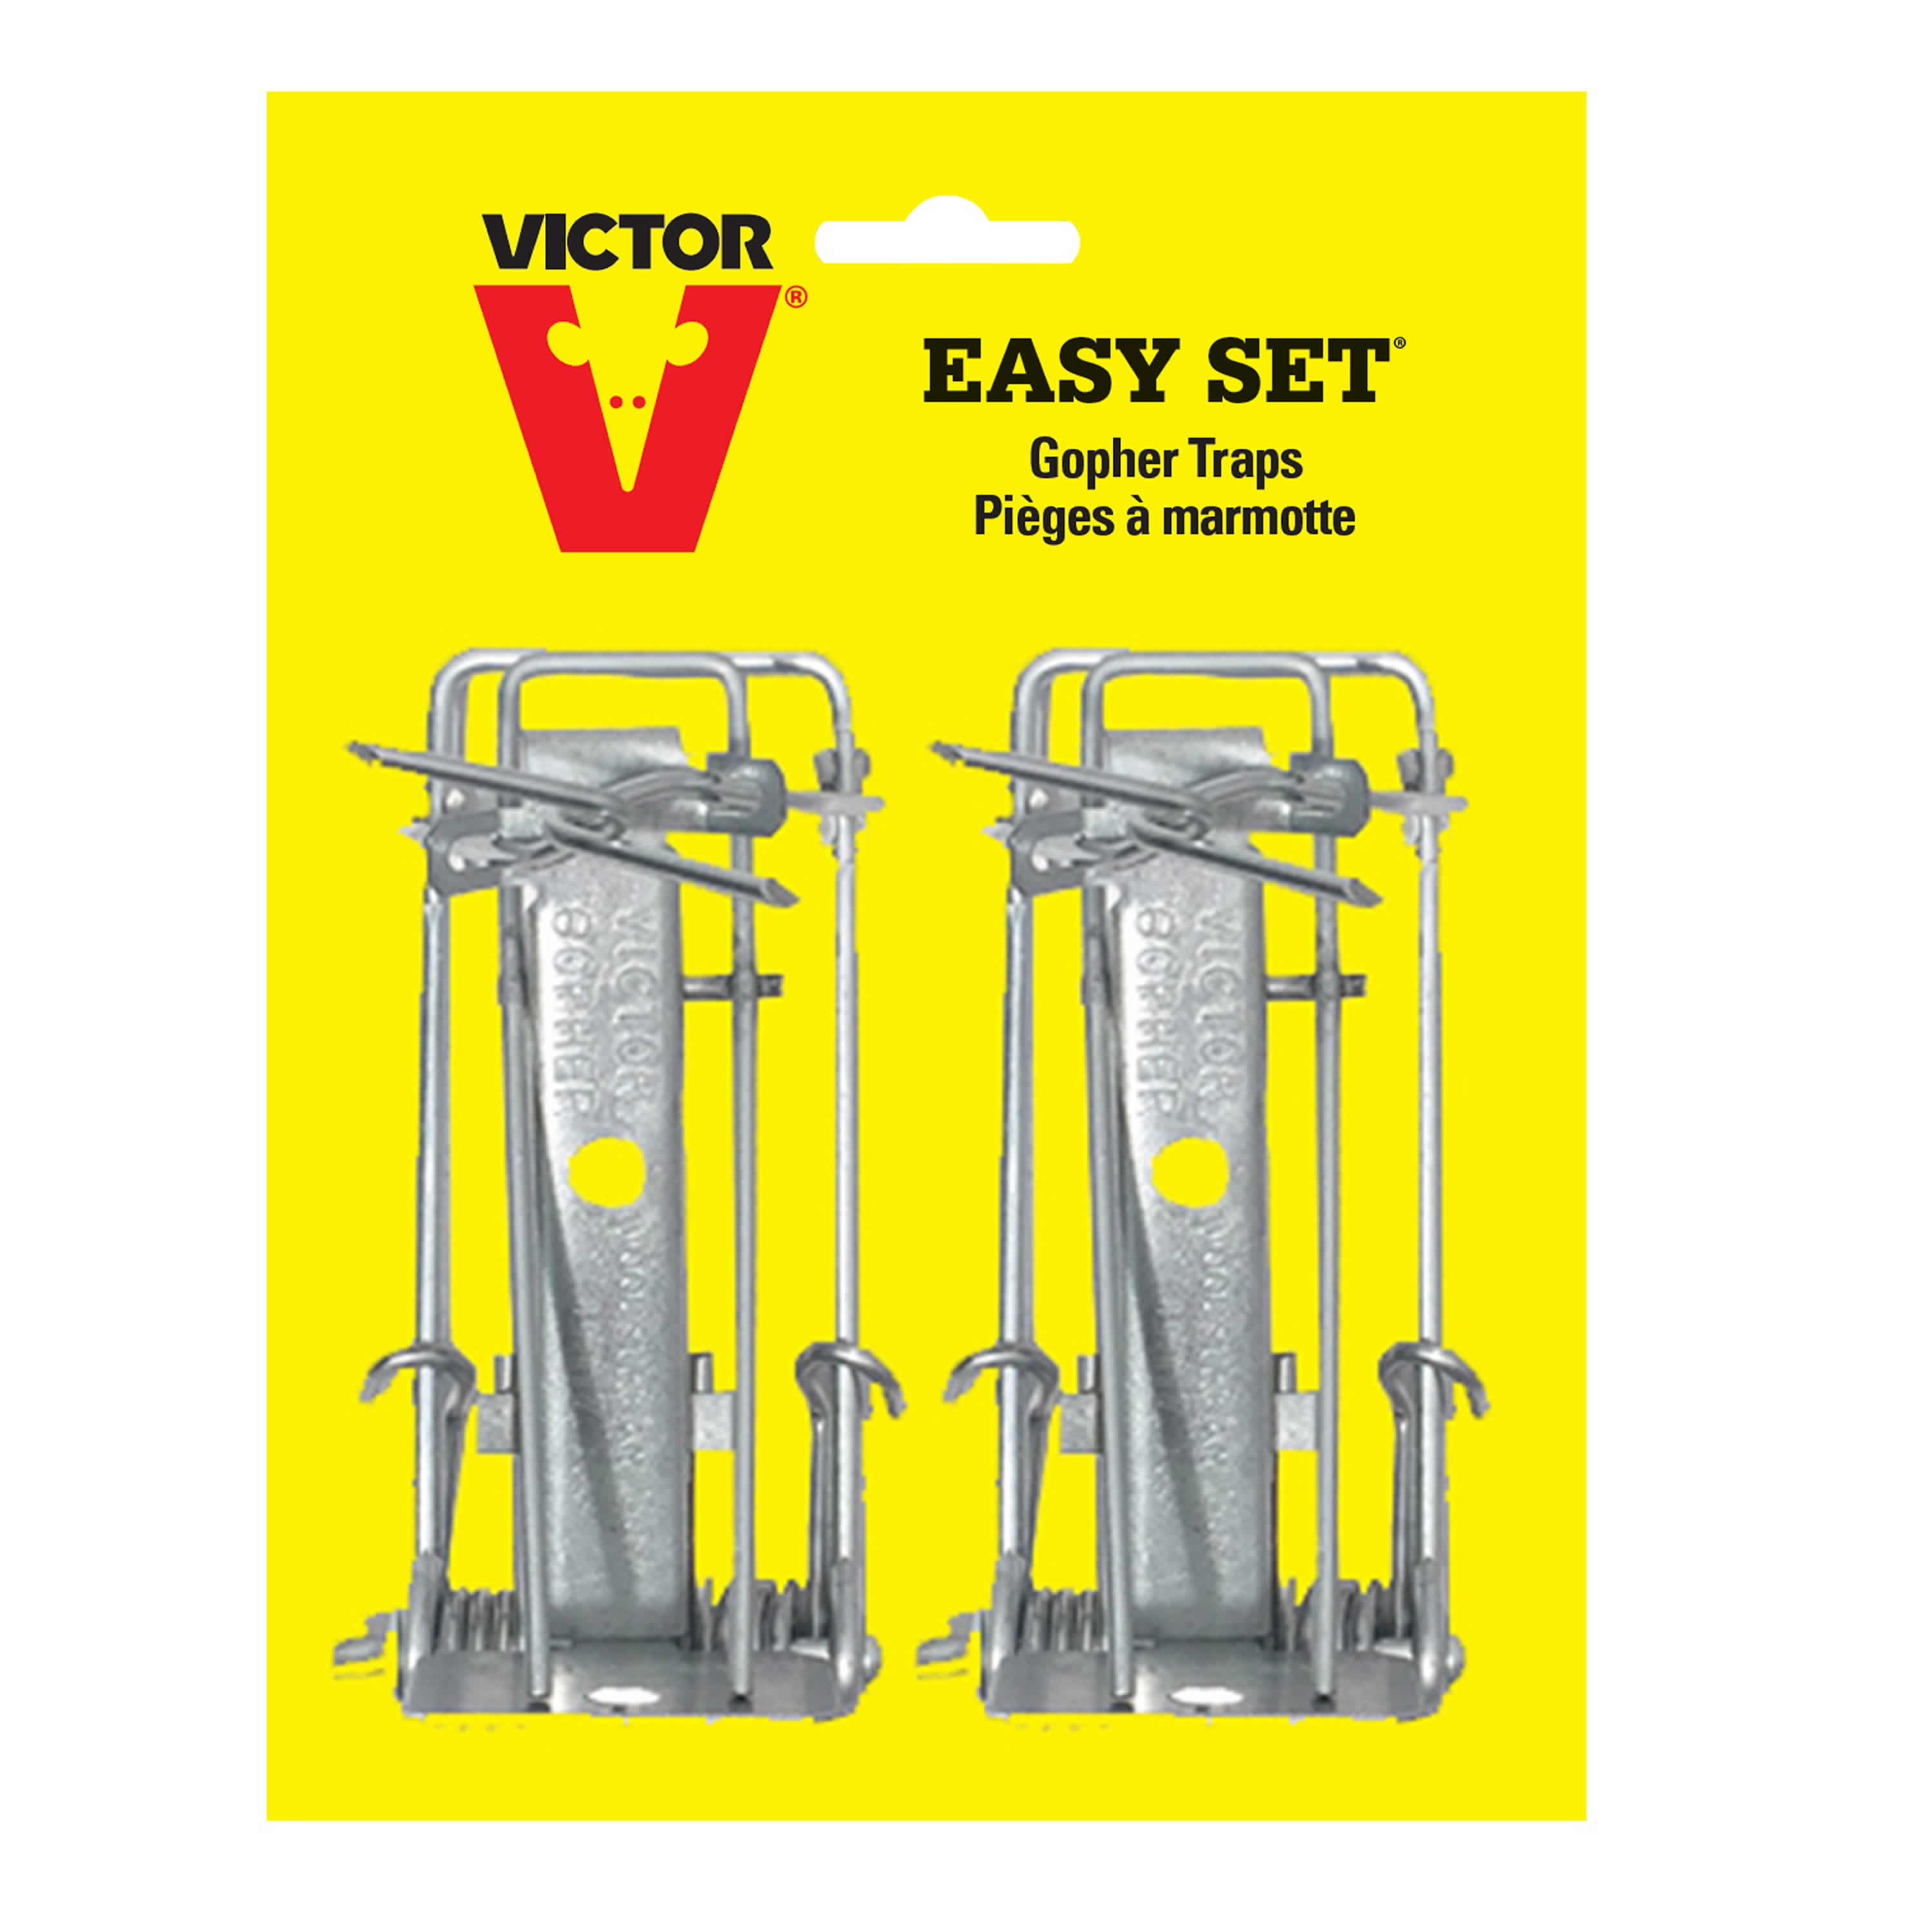 Easy One-Step,Out-of-Sight,Galvanized Steel 2416 1 Trap Easy Set Mole Trap 